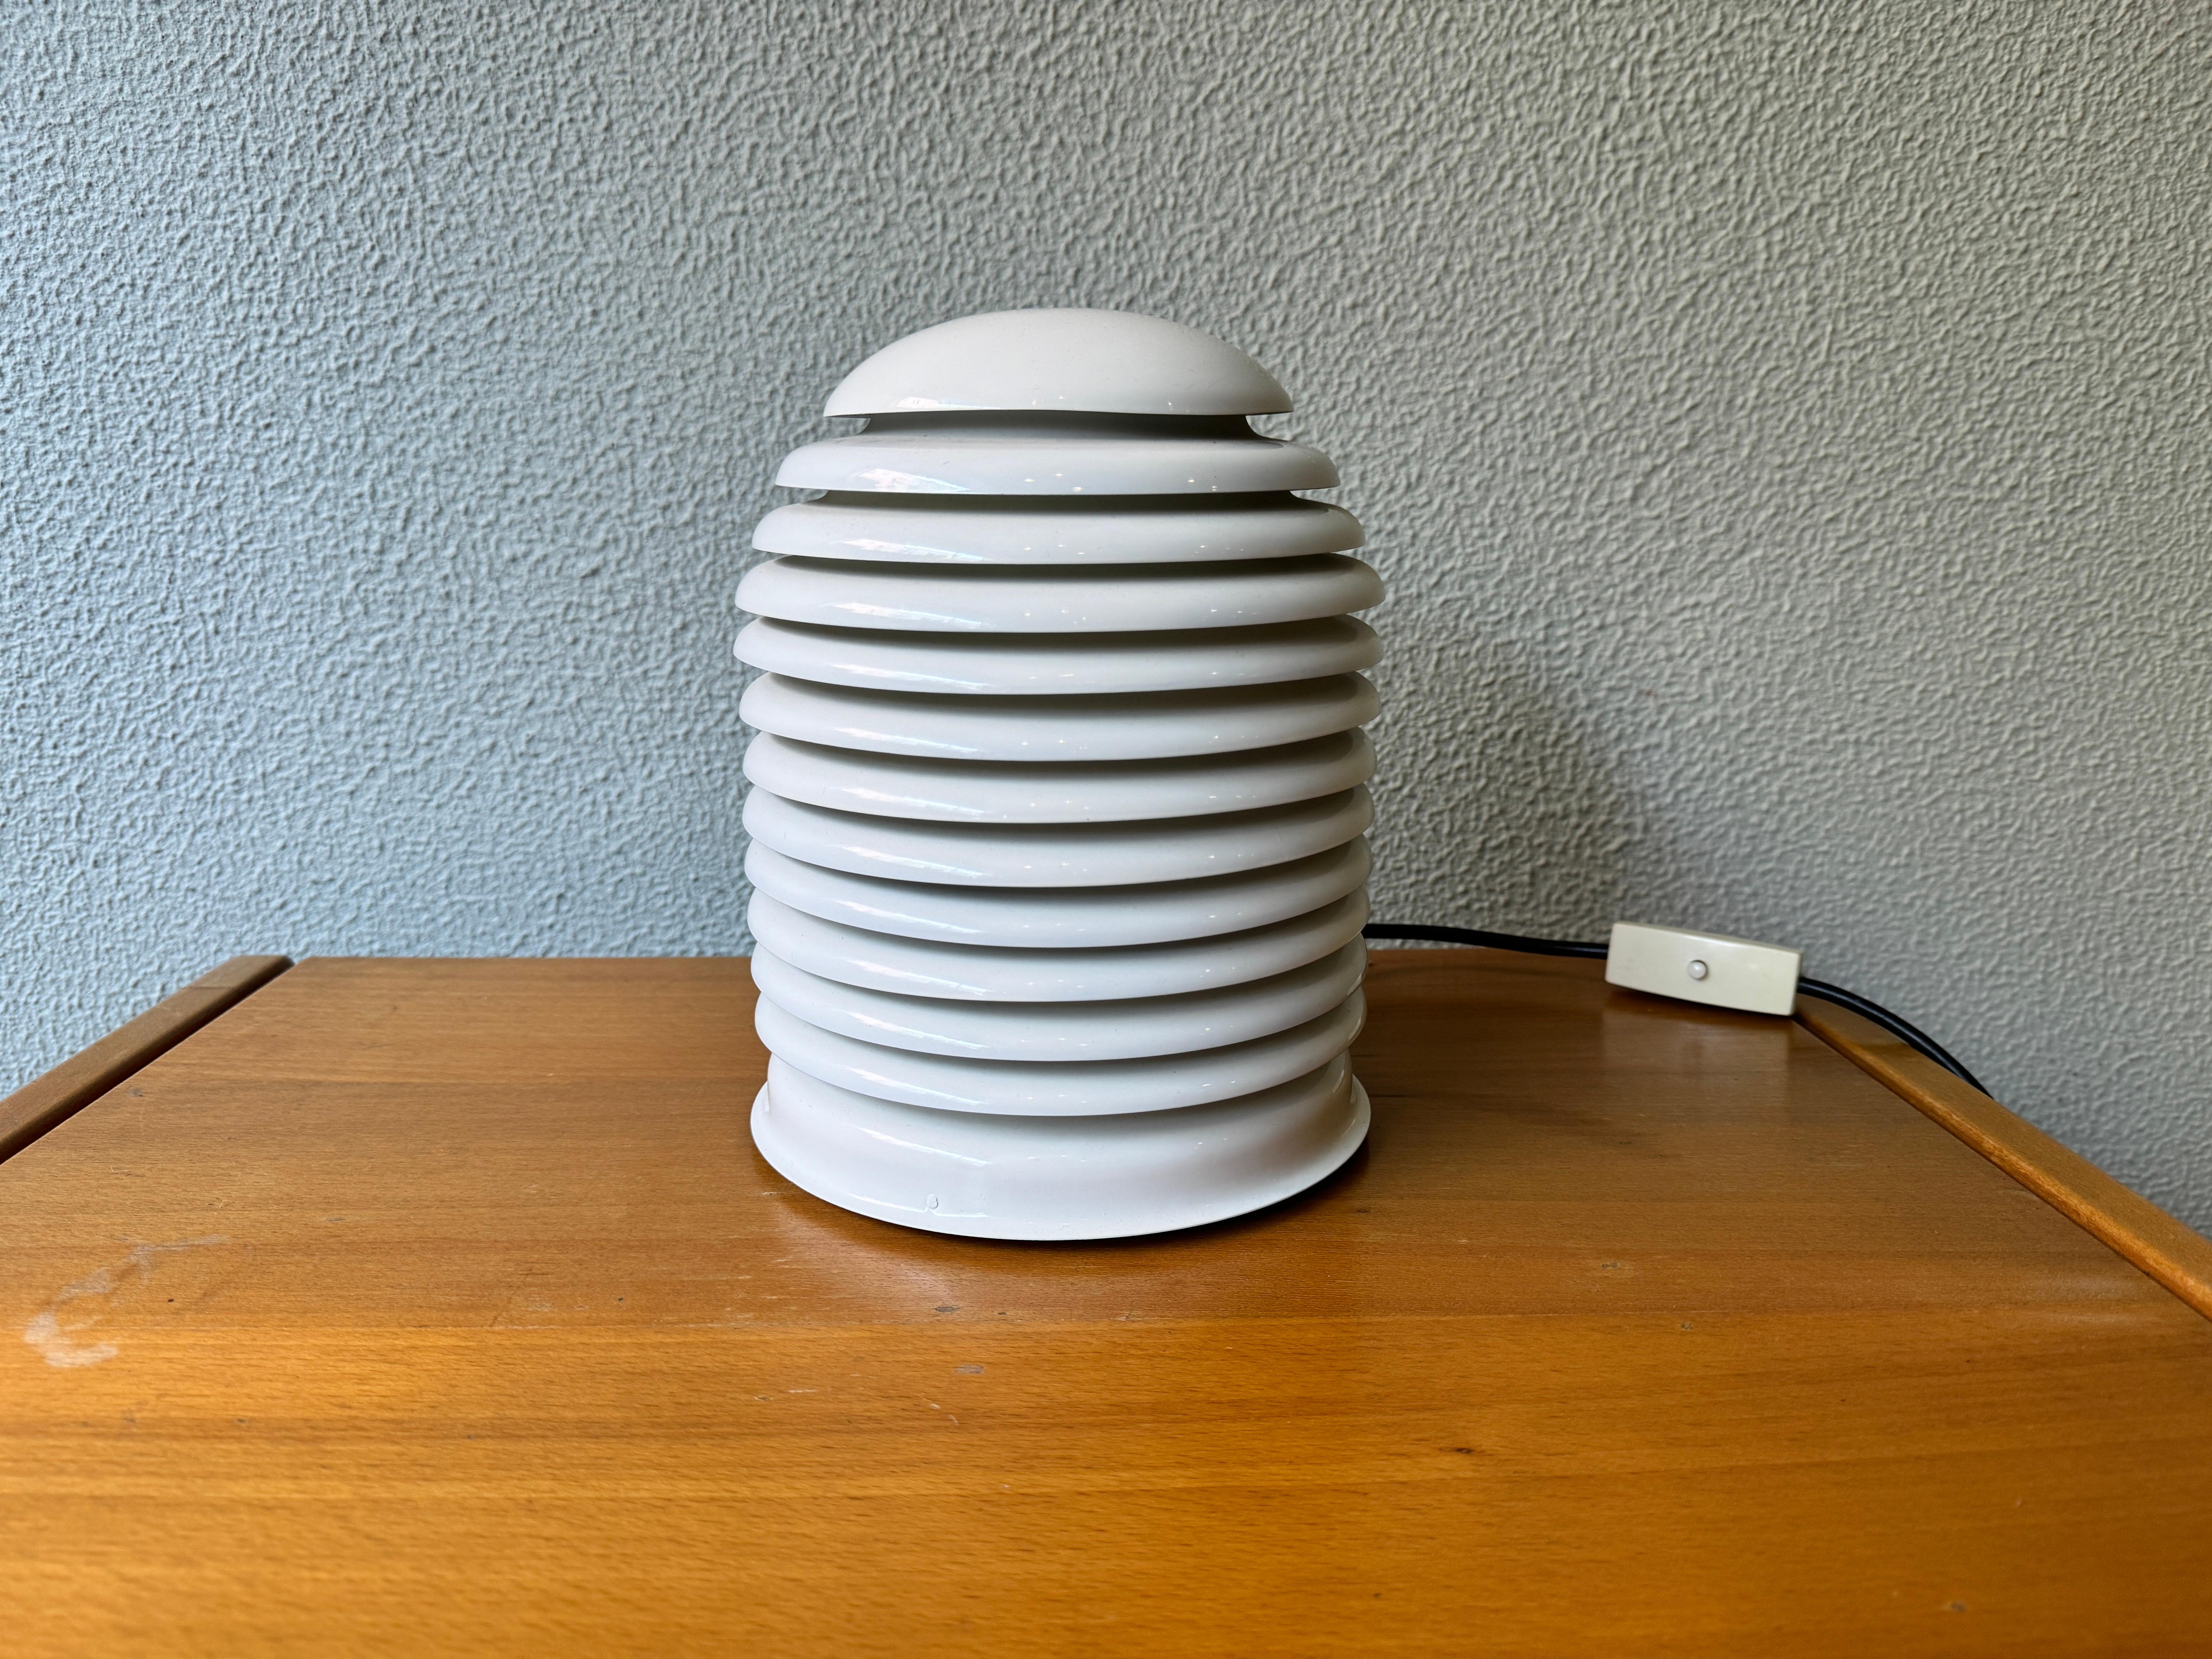 Introducing the stunning Vintage Saturno Table Lamp by Kazuo Motozawa for Staff Leuchten, a true gem of the 1970's. The Saturno Collection was a recipient of the prestigious IF design award in 1972, and it's easy to see why. With a unique off white